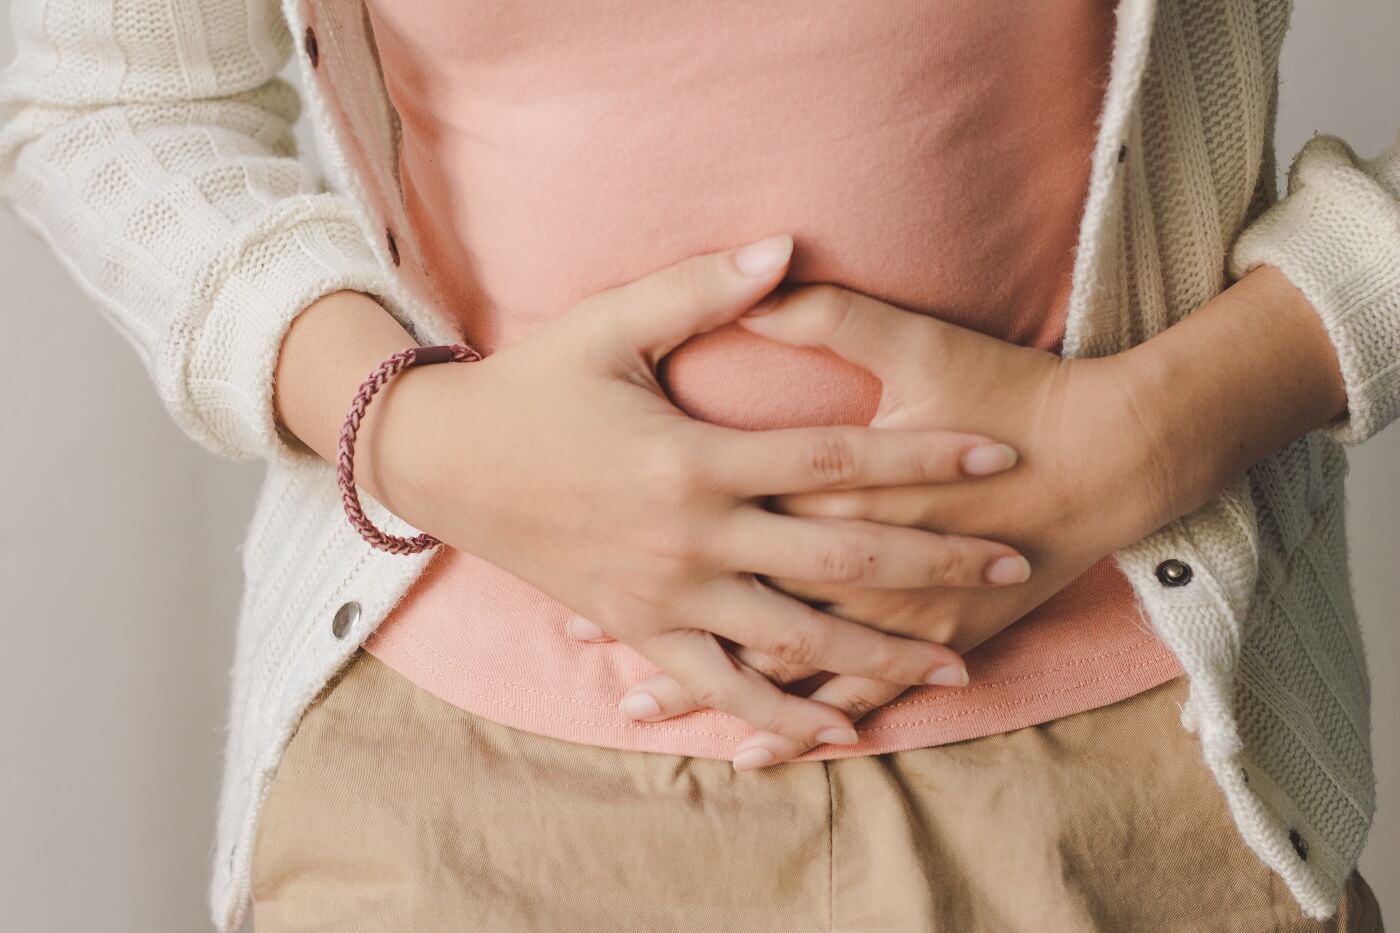 Bloating During Ovulation: Causes, Symptoms, and Remedies